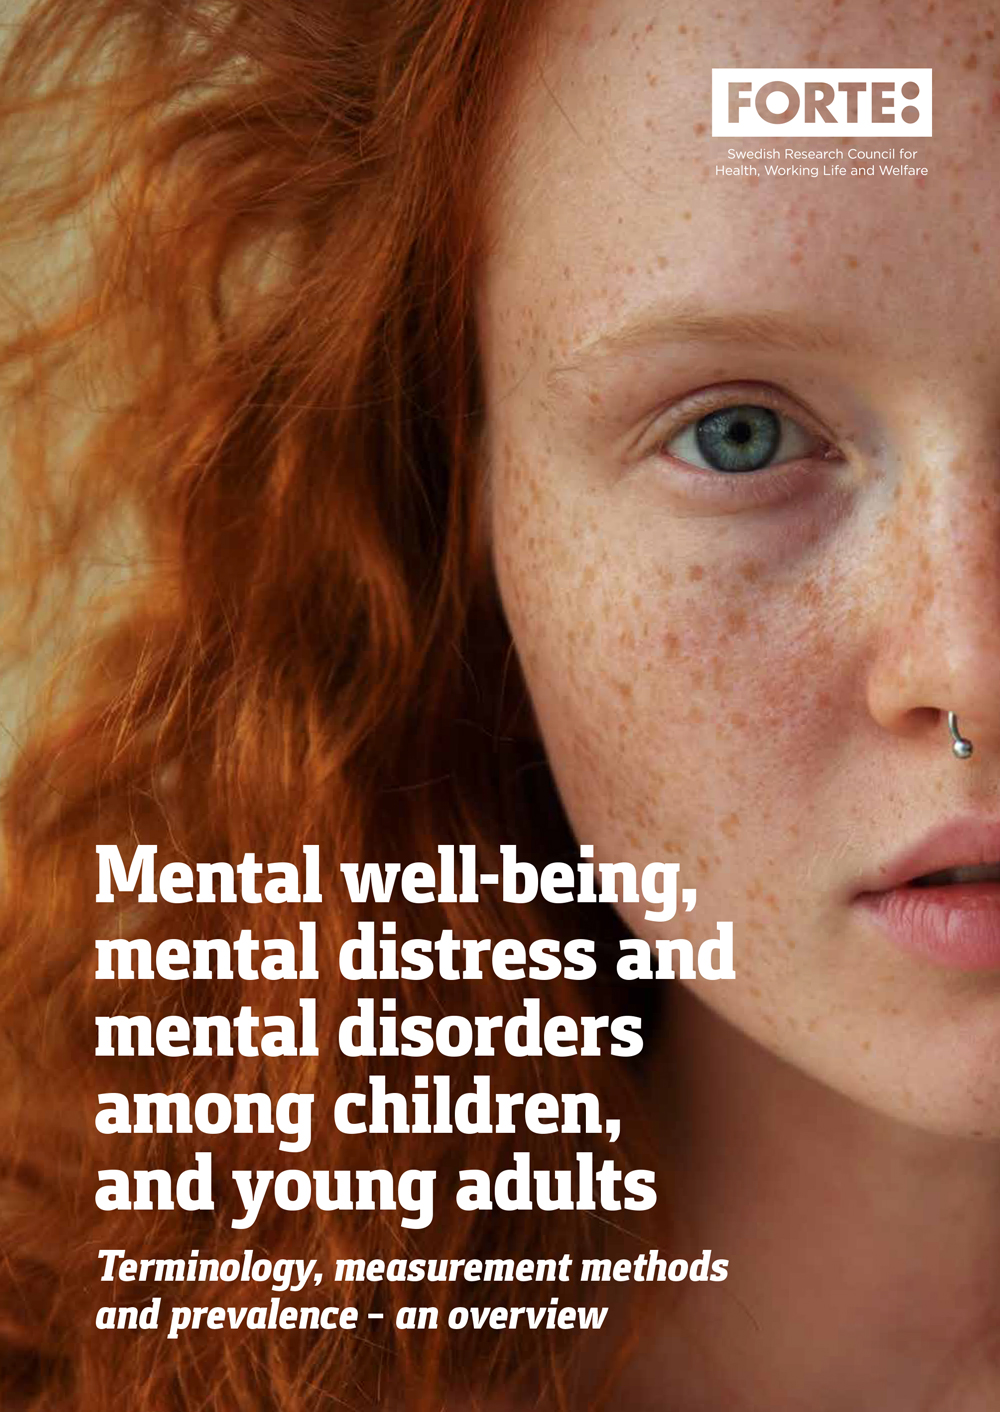 Mental well-being, mental distress and mental disorders among children and young adults – English summary